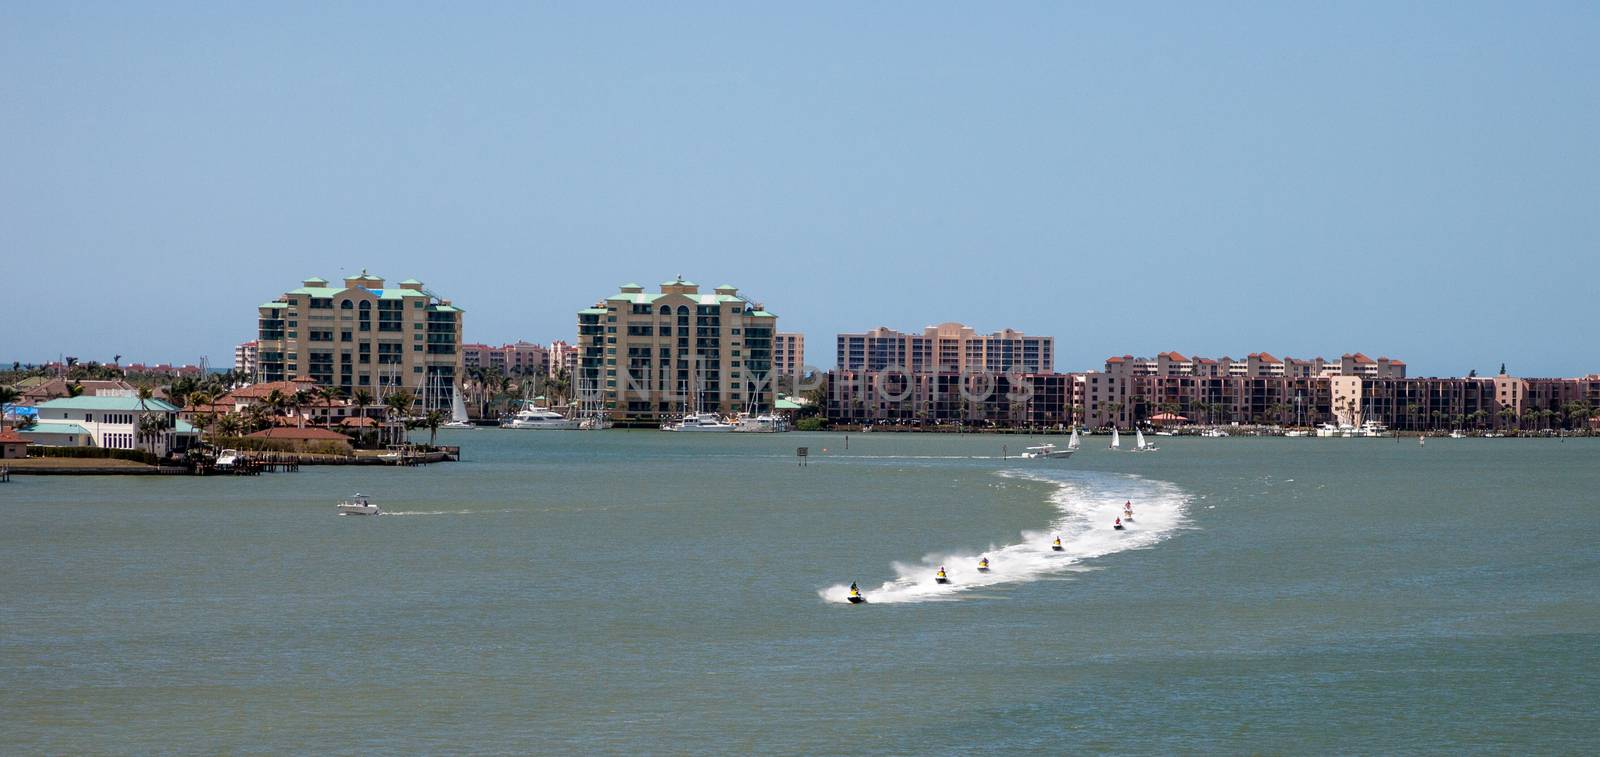 Skyline in the background as a Group of jet skies zip along the ocean in a straight line, making waves in the ocean in the bay in front of Marco Island, Florida